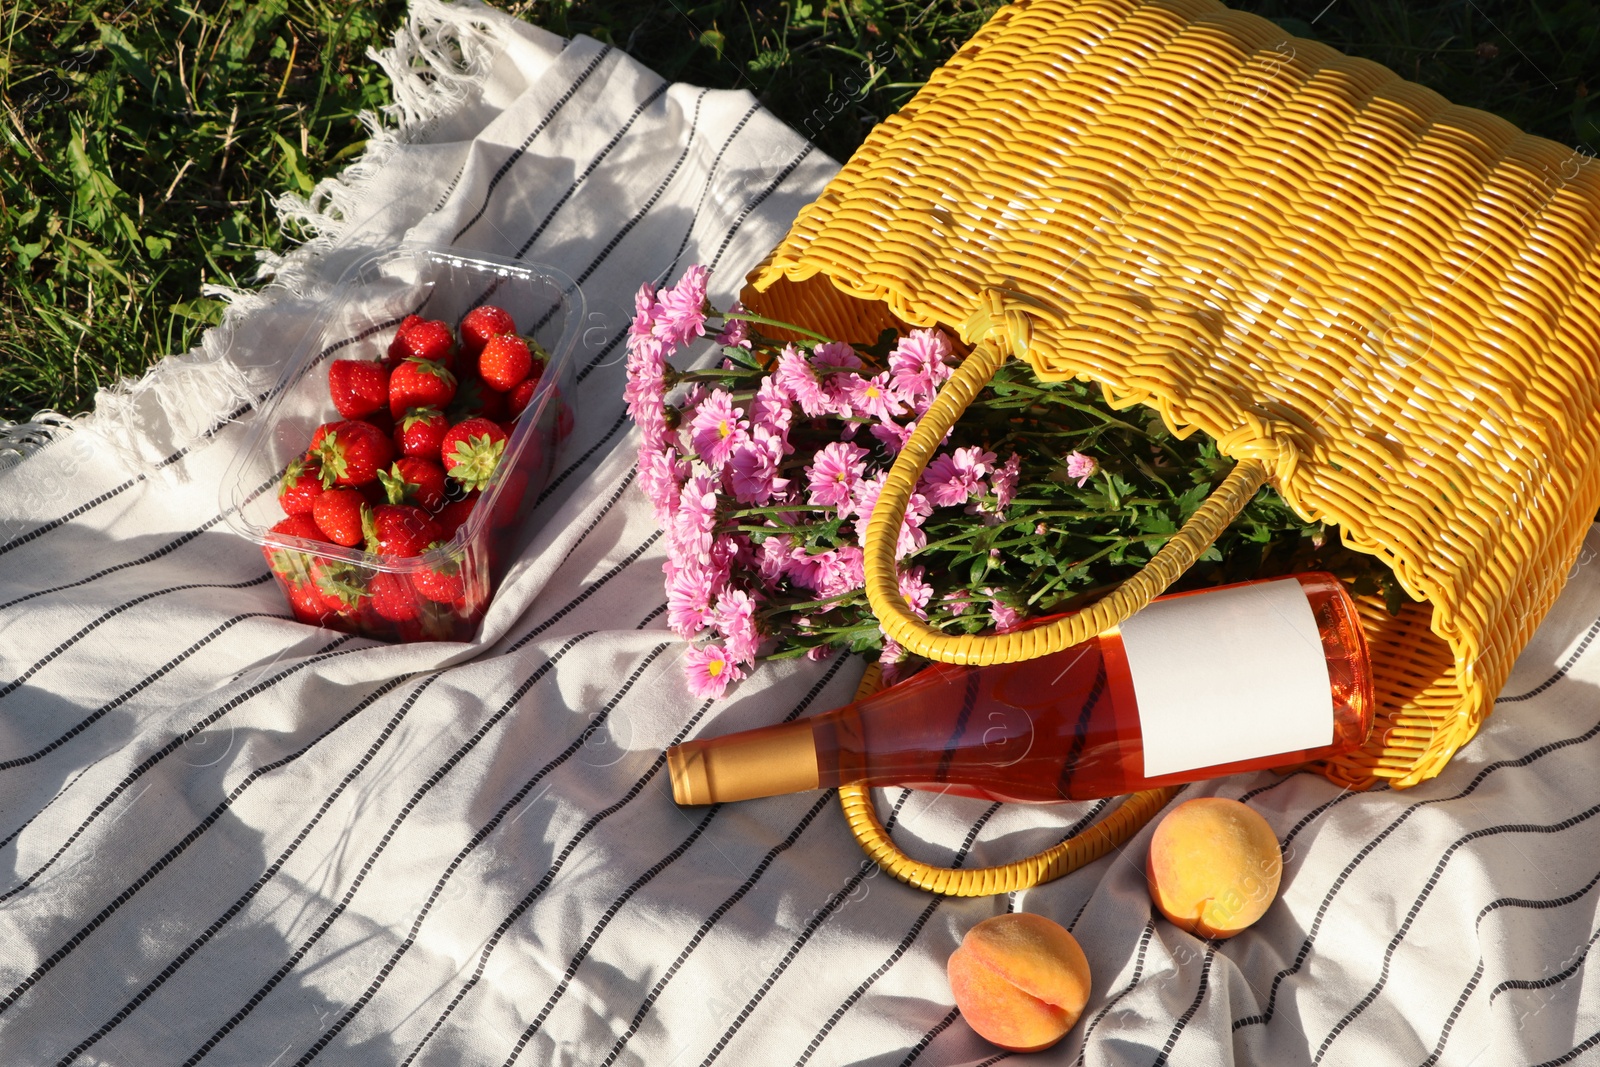 Photo of Yellow wicker bag with beautiful flowers, bottle of wine and food on picnic blanket outdoors